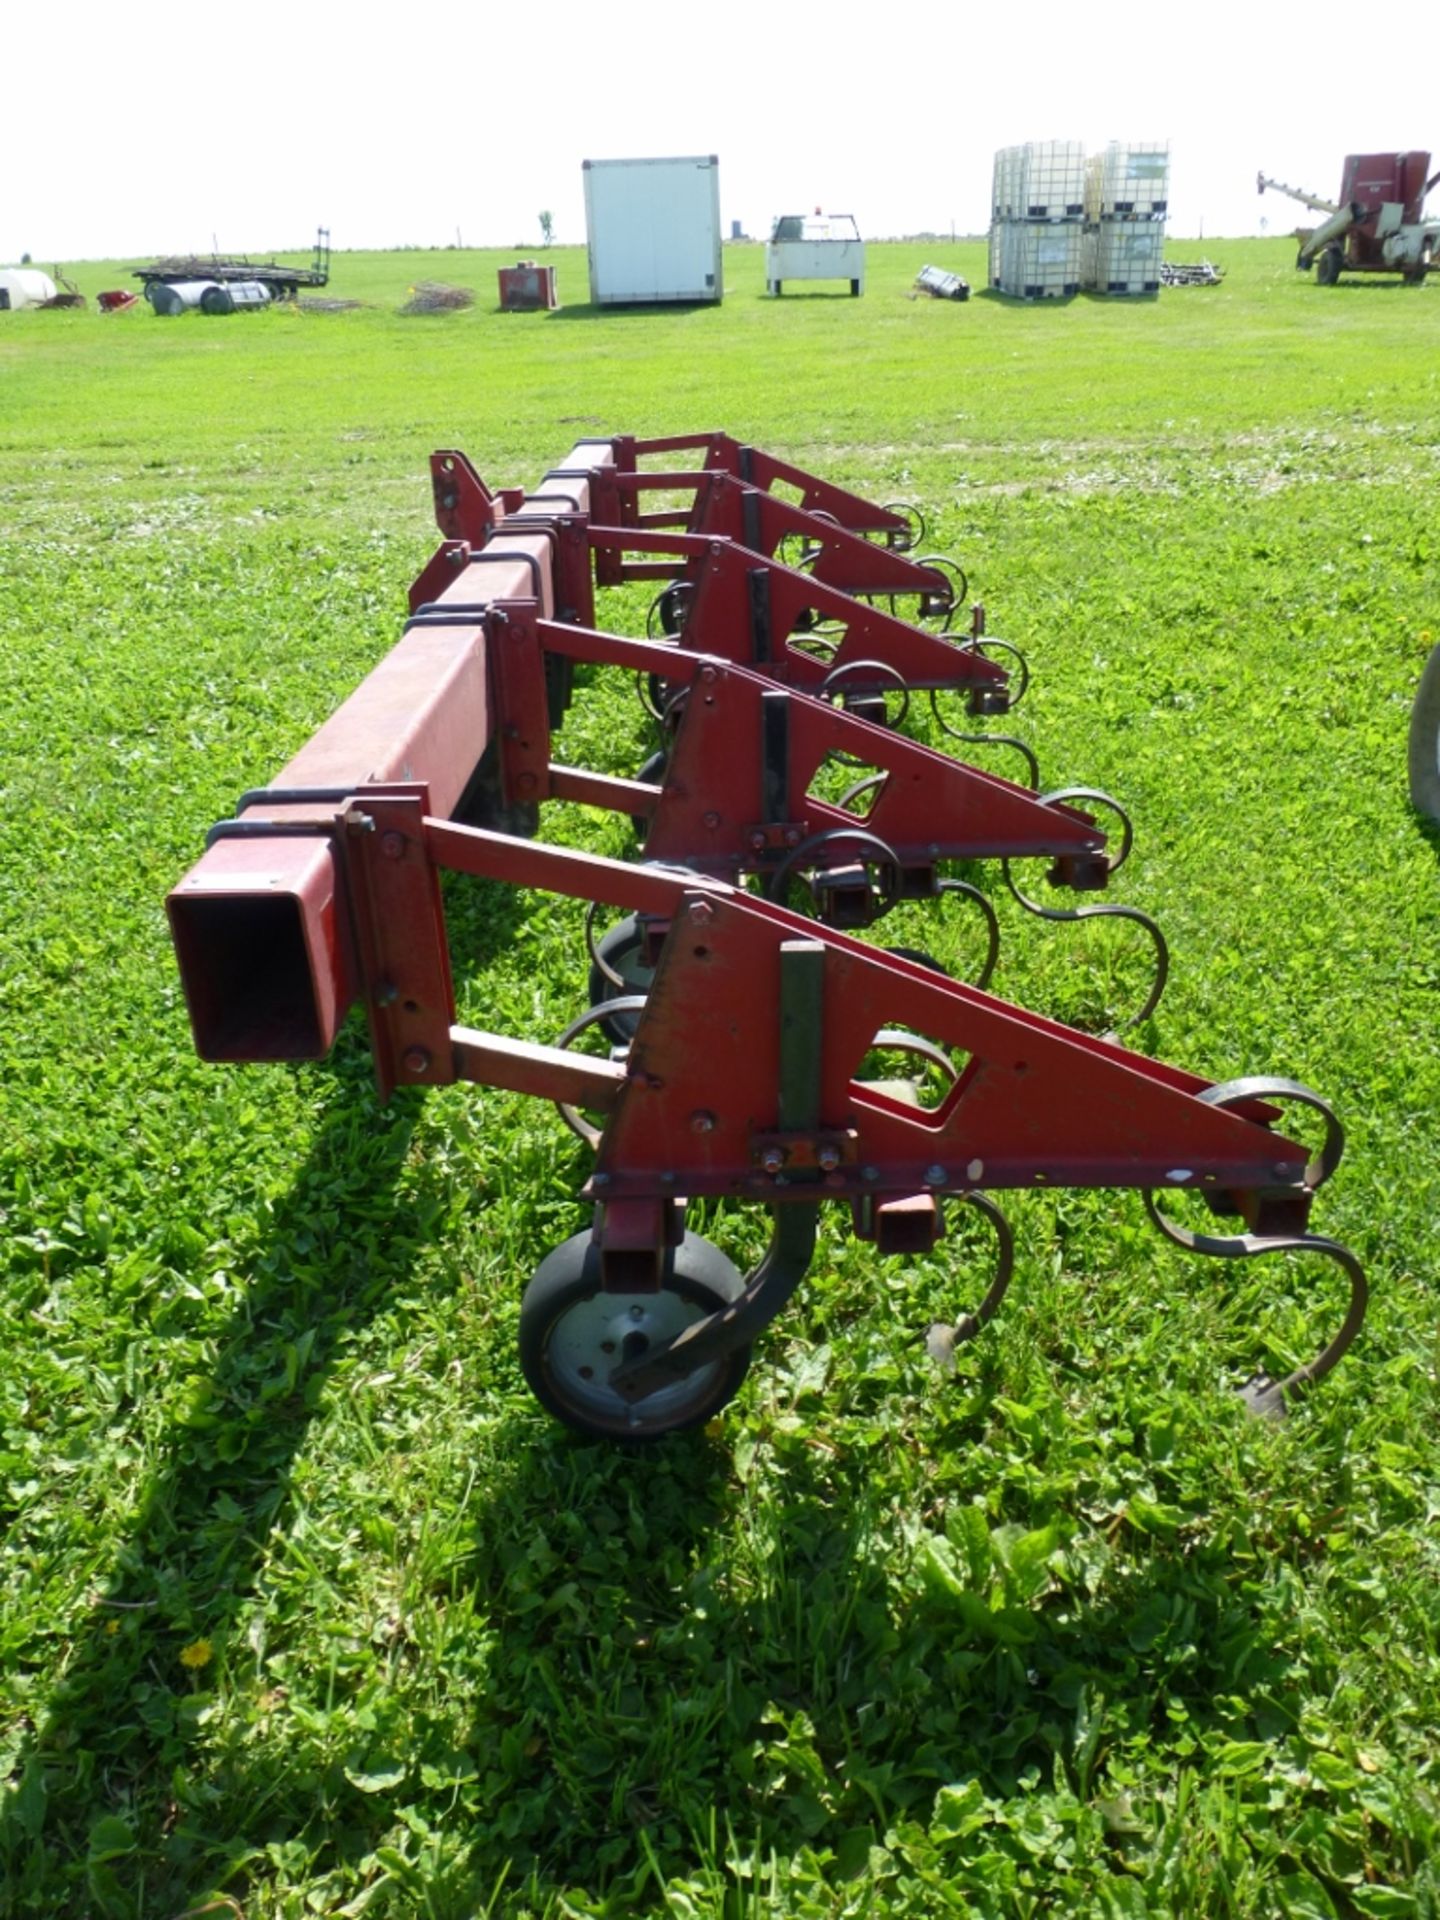 Case IH model 183, 4 row, 3pt field cultivator - Image 4 of 8